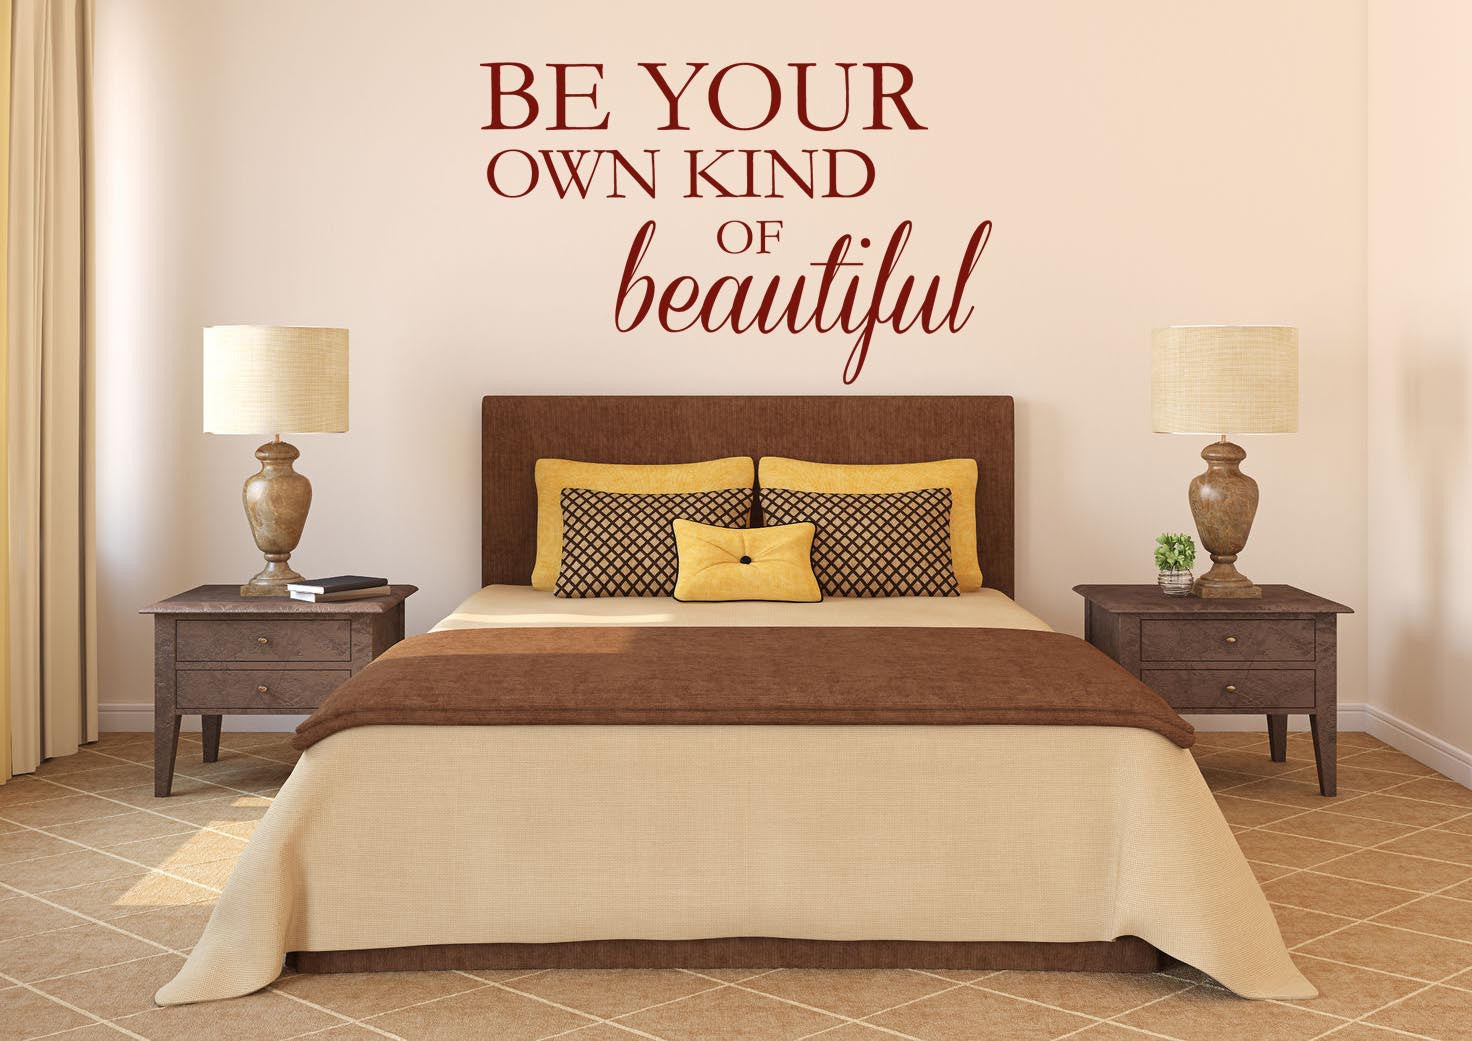 Be Your Own Kind Of Beautiful Wall Sticker - Canvas Art Rocks - 1